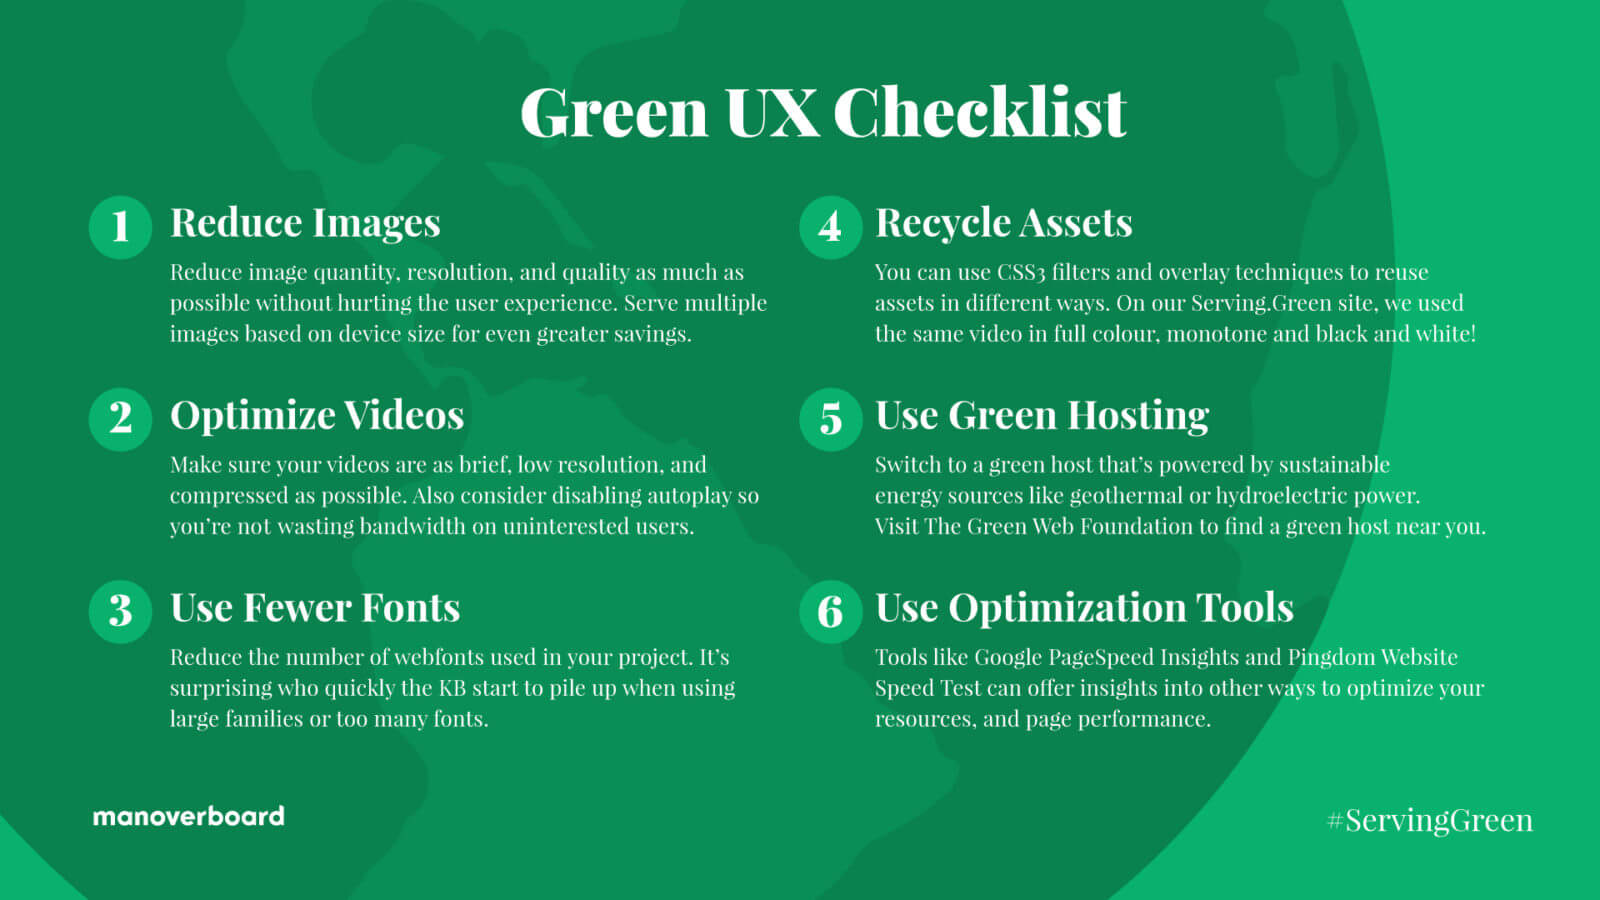 White text on green background. Green UX Checklist. 1. Reduce images. 2. Optimize videos. 3. Use fewer fonts. 4. Recycle assets. 5. Use green hosting. 6. Use optimization tools.